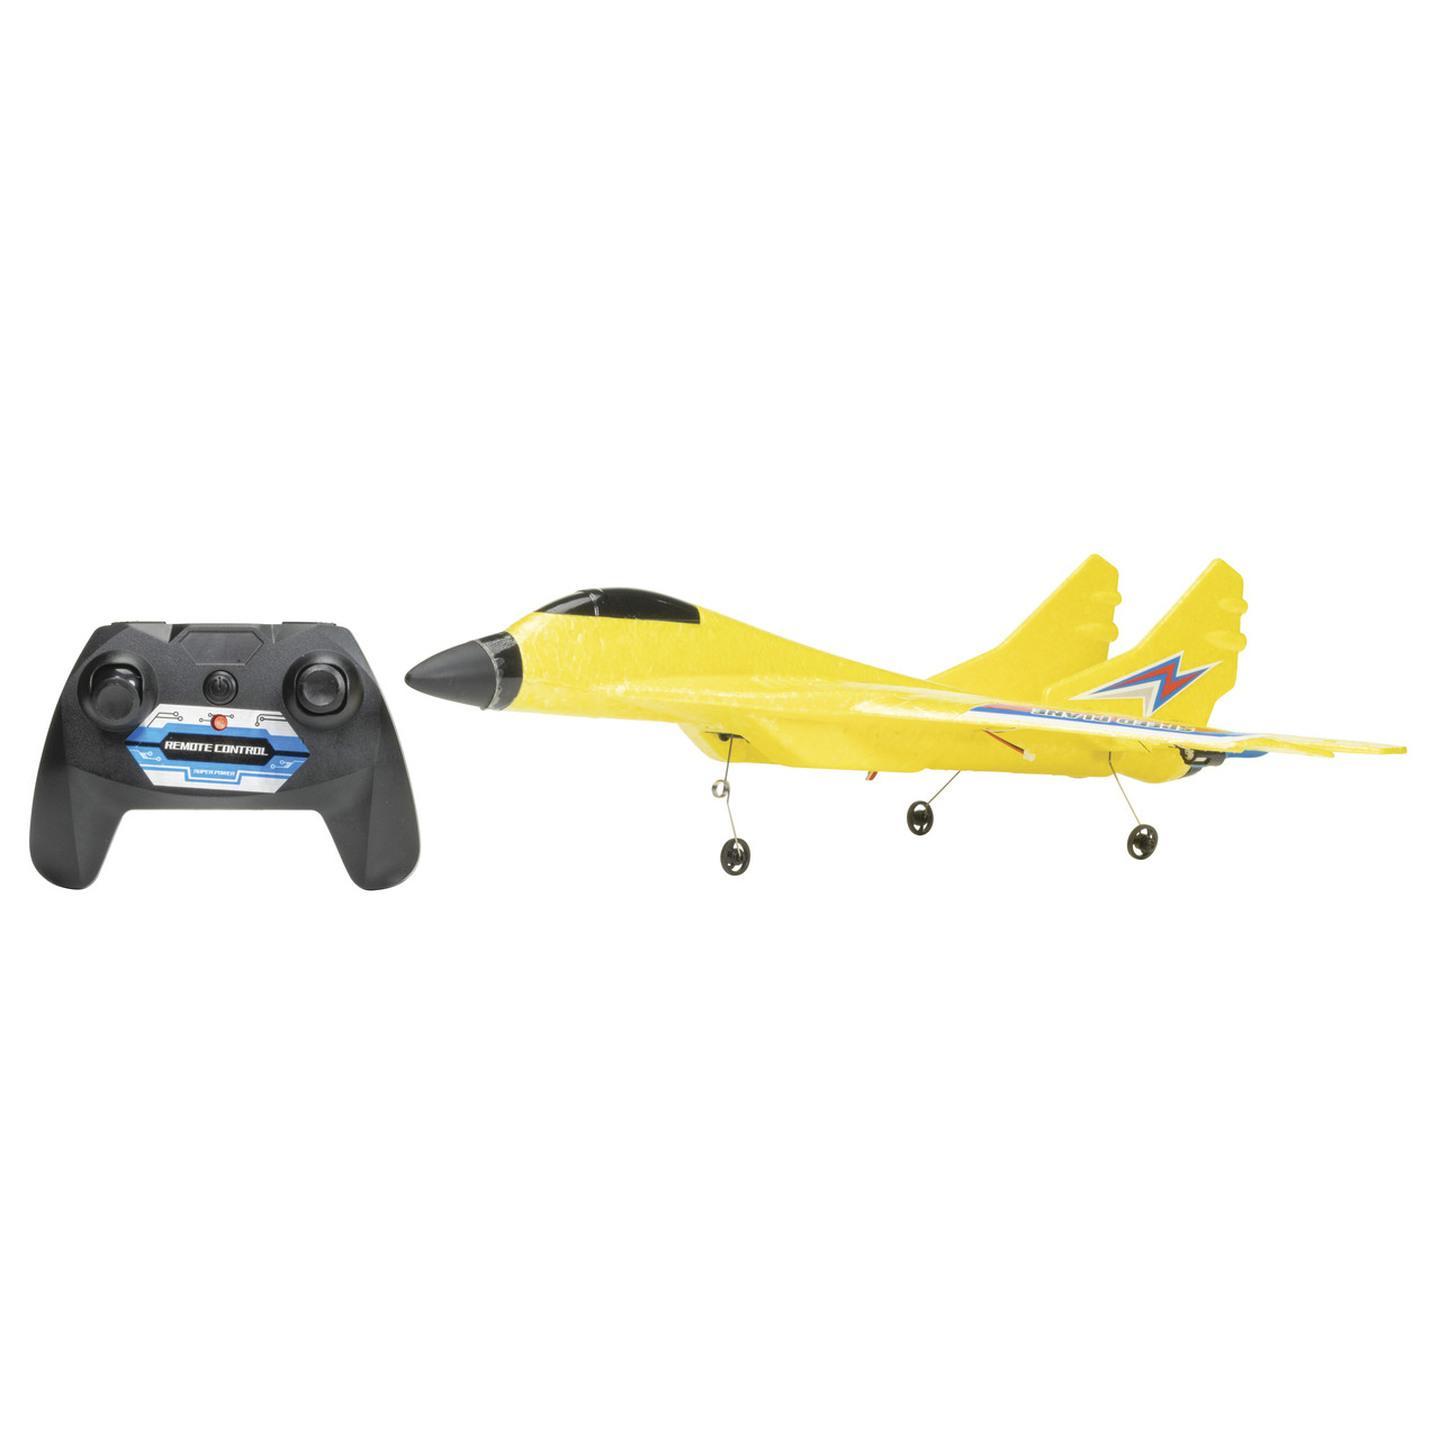 R/C Plane with LEDs